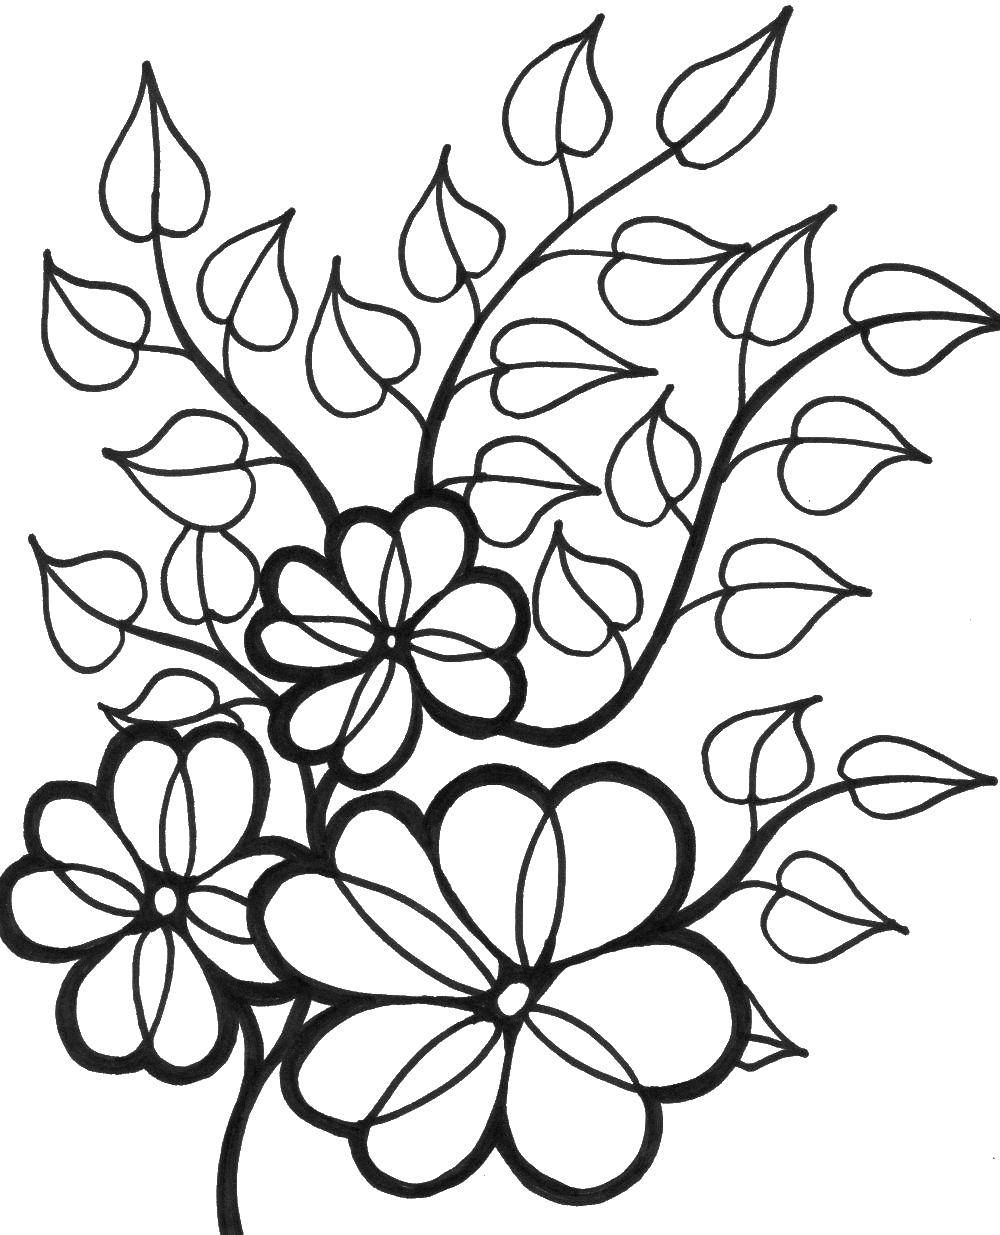 Coloring Flowers and leaves. Category flowers. Tags:  Flowers.